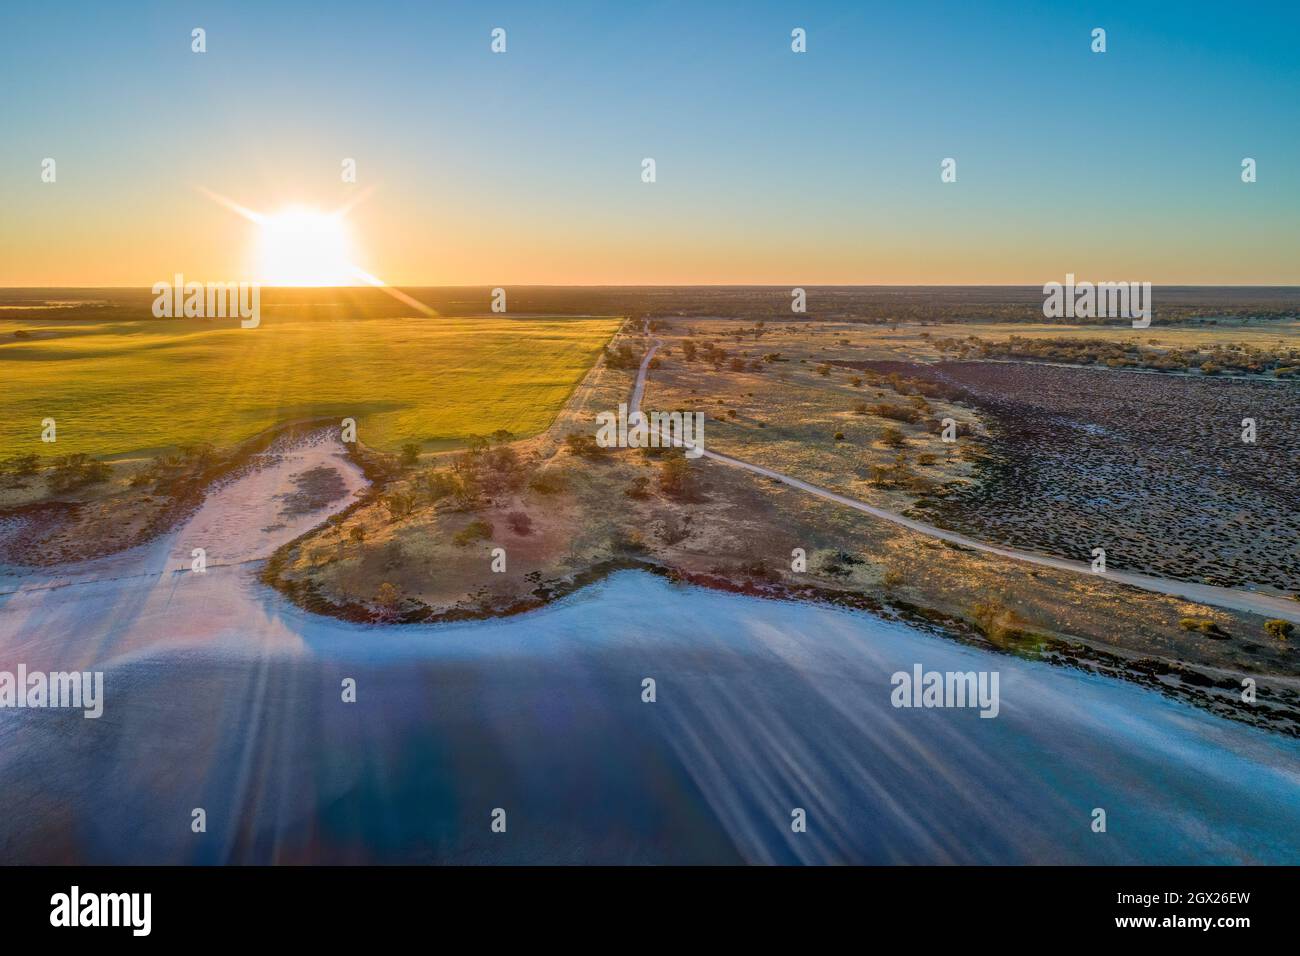 Aerial View Of Landscape Against Sky During Sunset Stock Photo